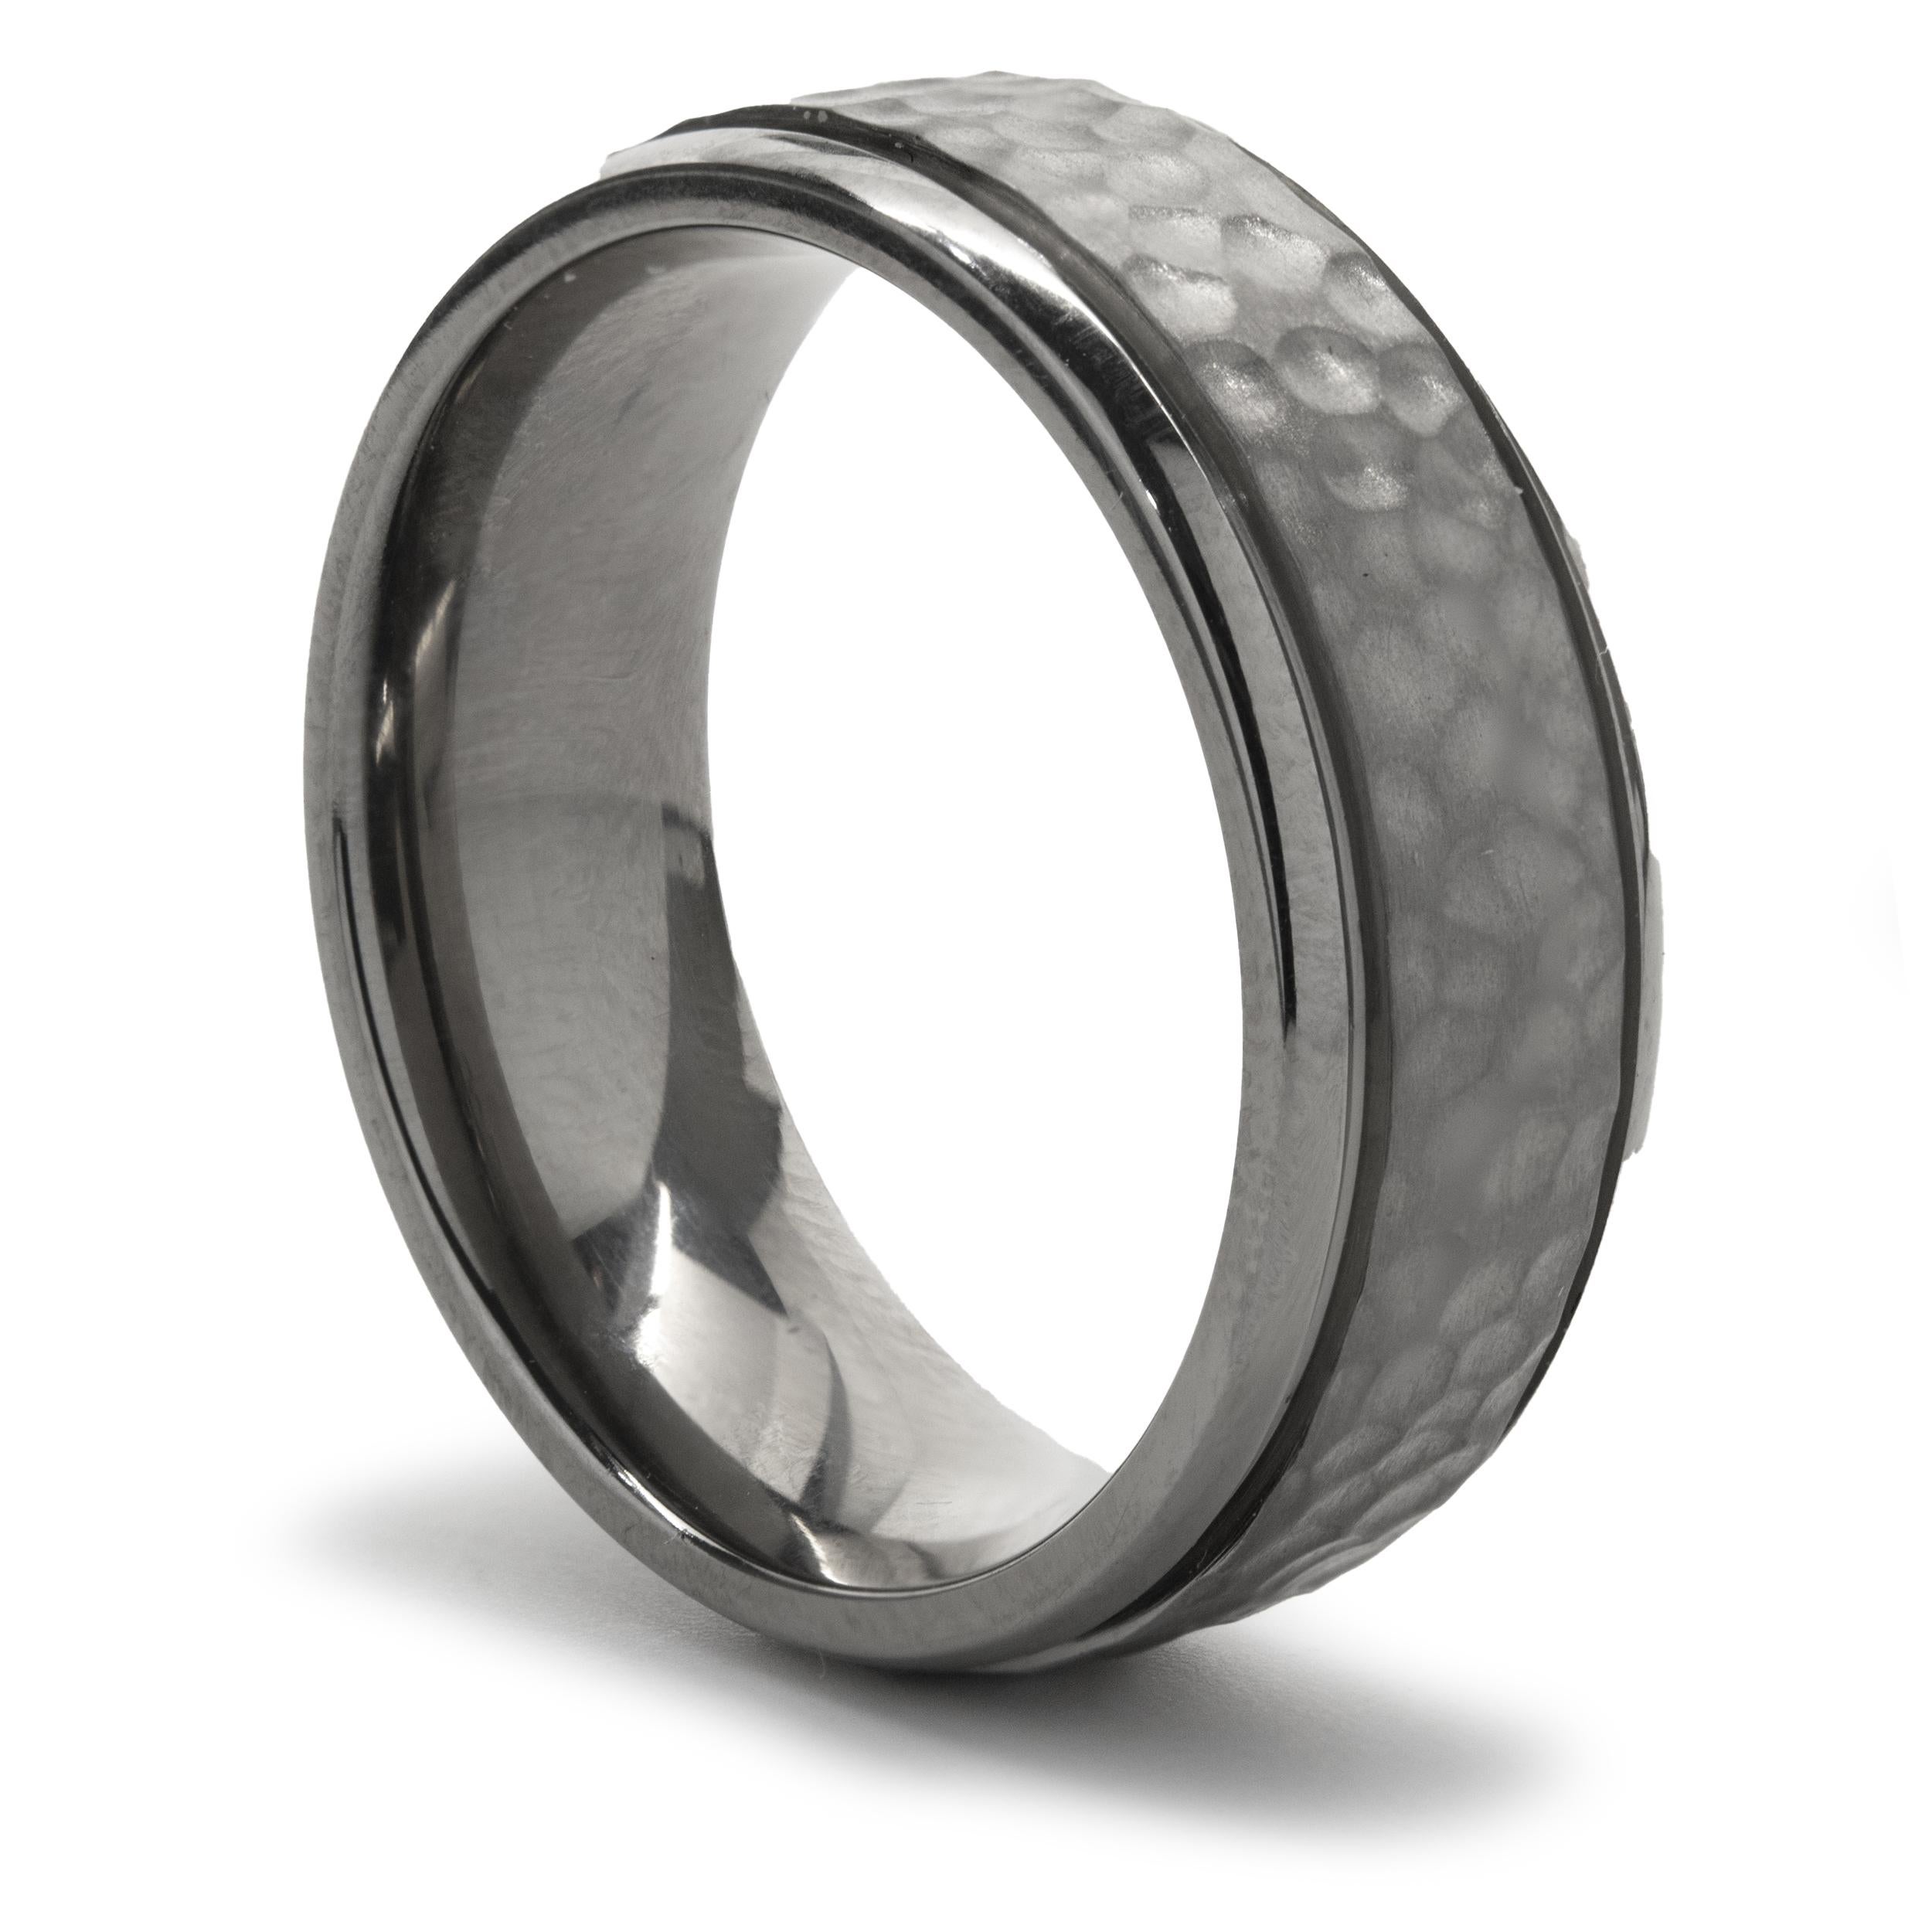 Designer: custom 
Material: Titanium
Dimensions: band is 8mm wide 
Ring Size: 10.25
Weight: 5.15 grams
